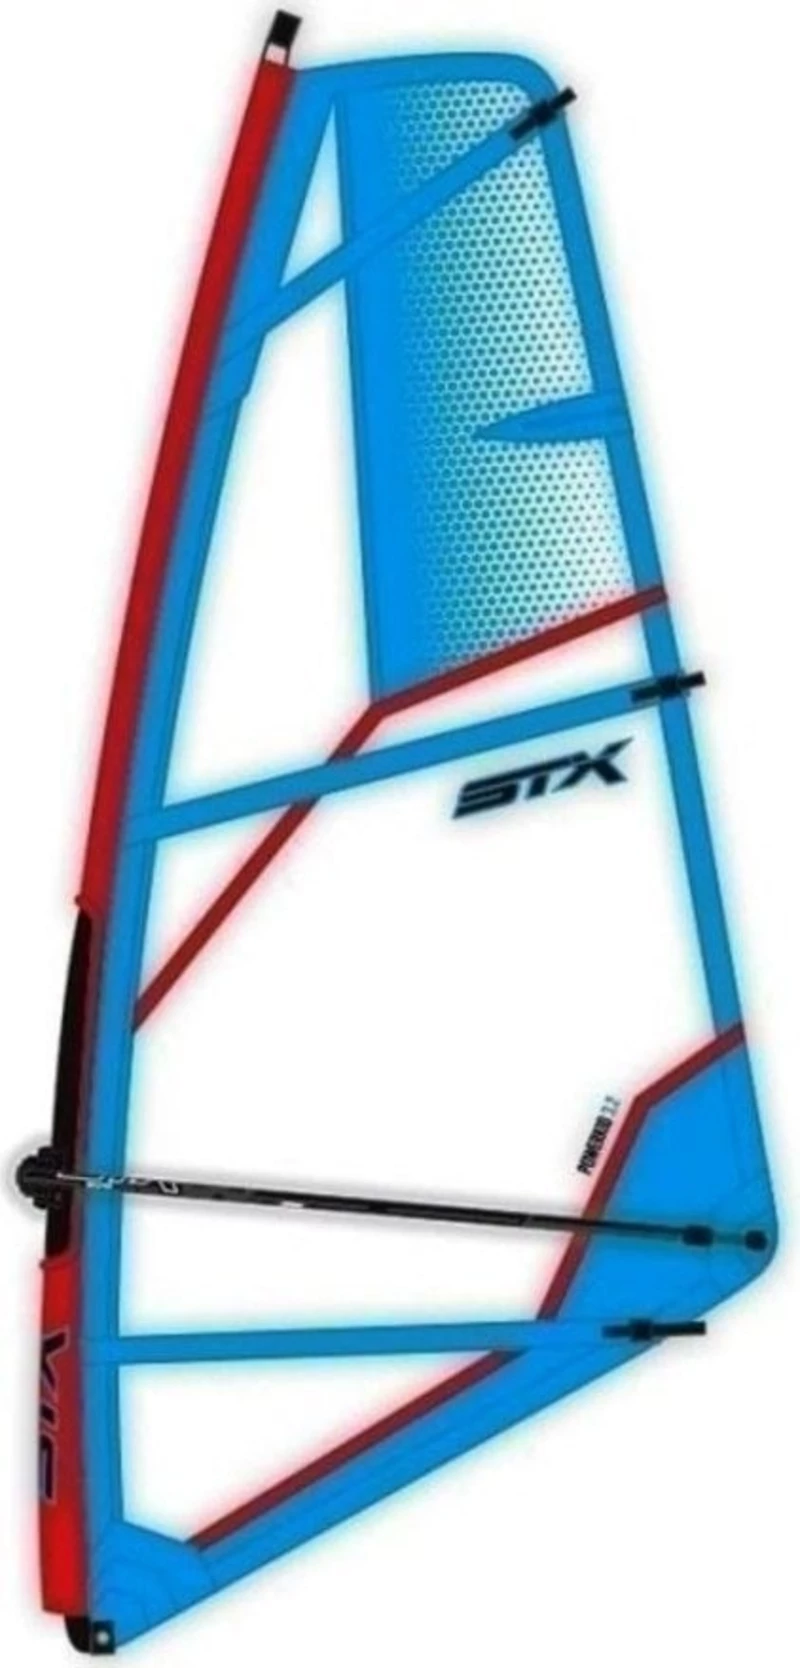 STX Plachta pro paddleboard Powerkid 3,6 m² Blue/Red